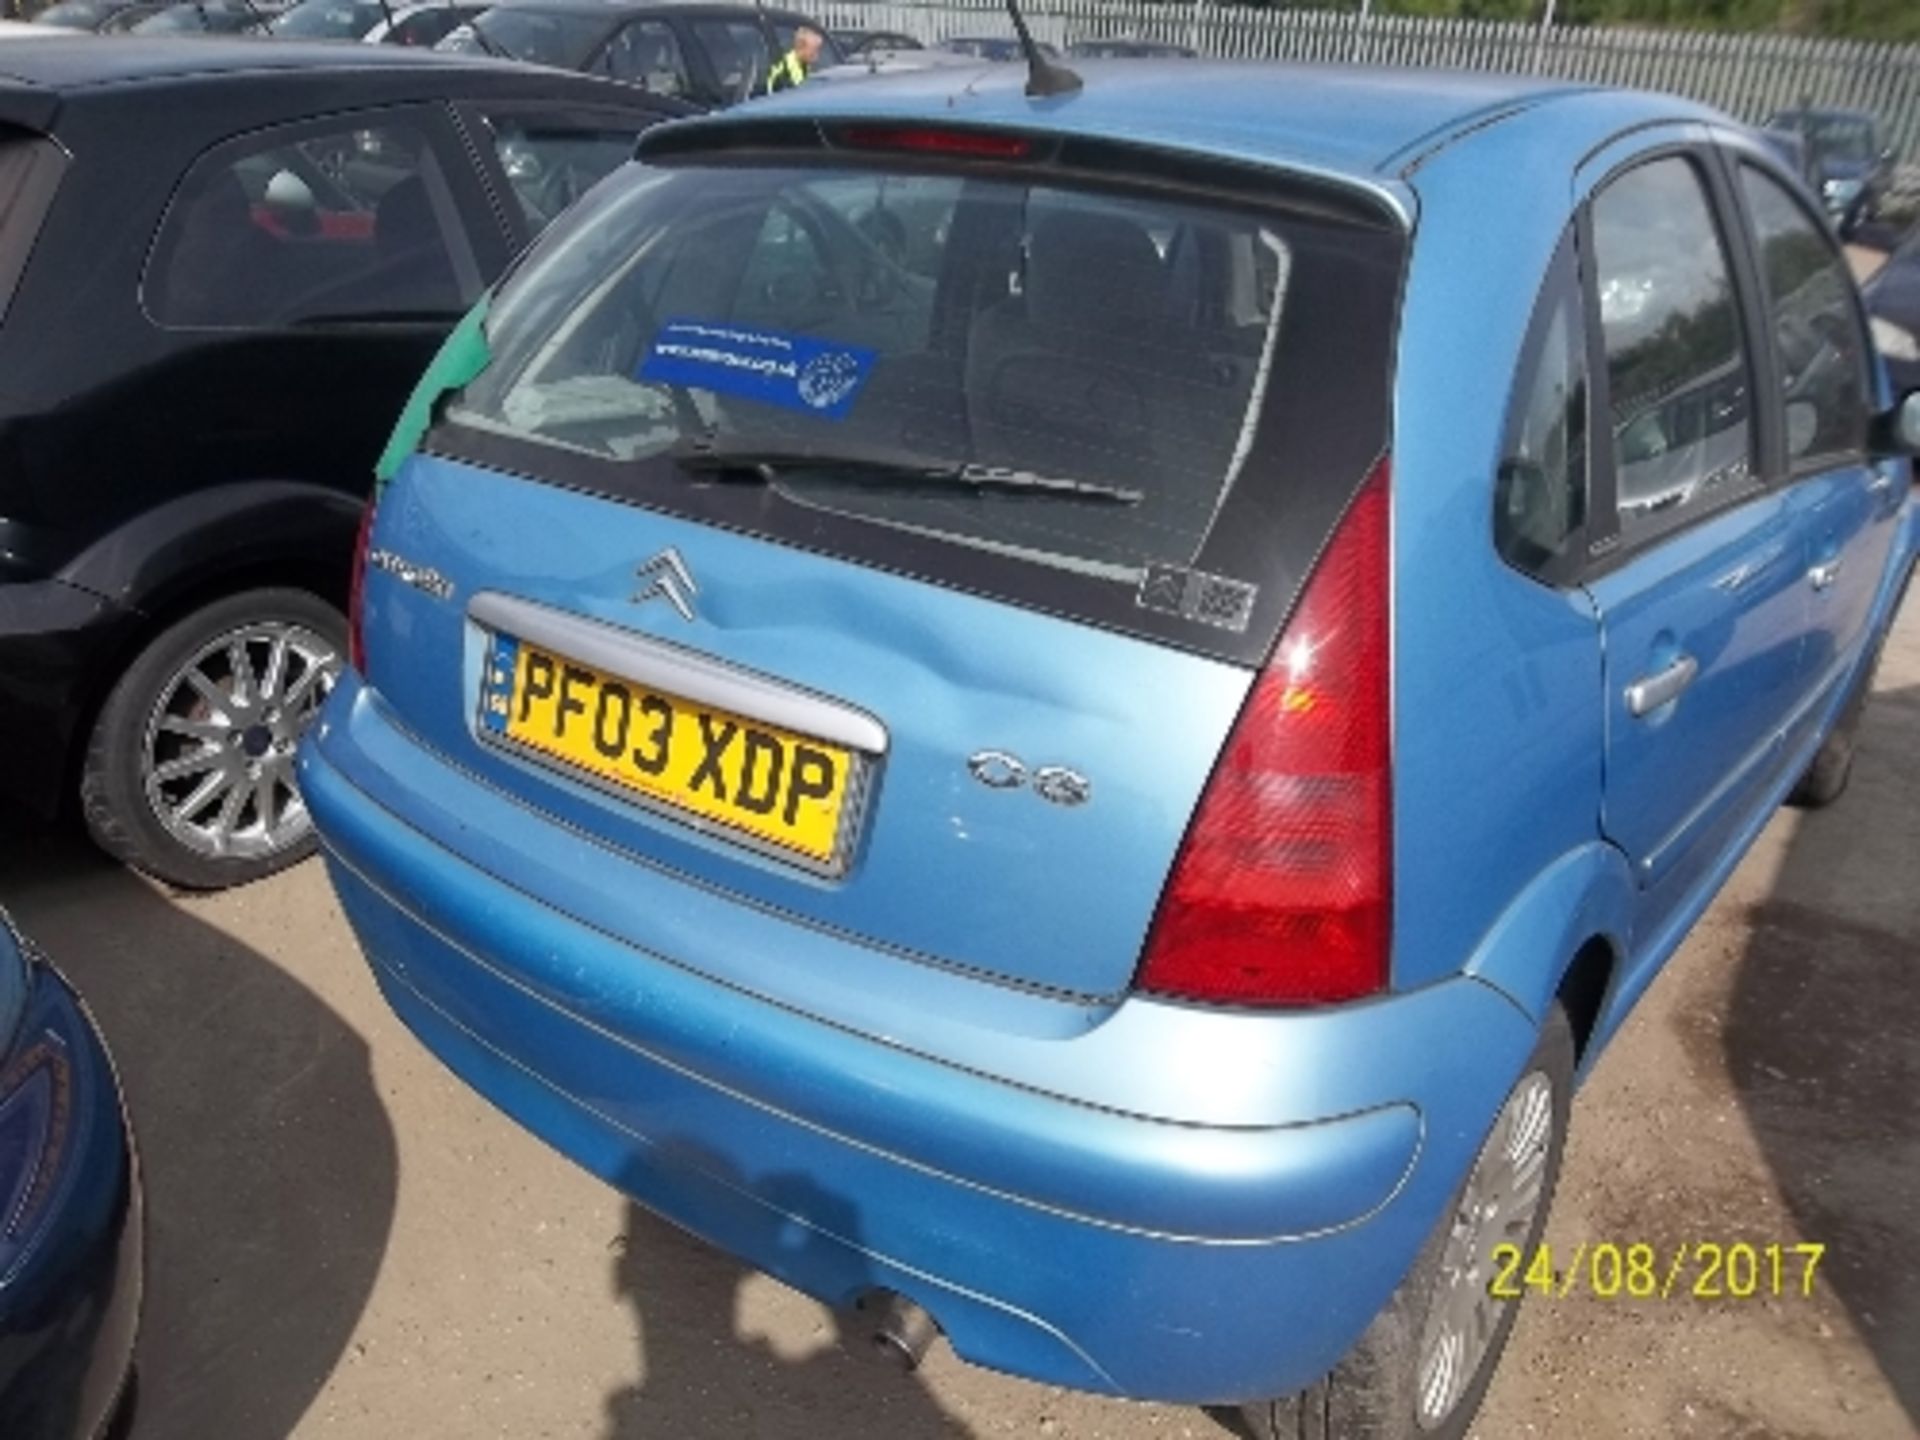 Citroen C3 Exclusive - PF03 XDP Date of registration: 31.05.2003 1587cc, petrol, 5 speed auto, - Image 3 of 4